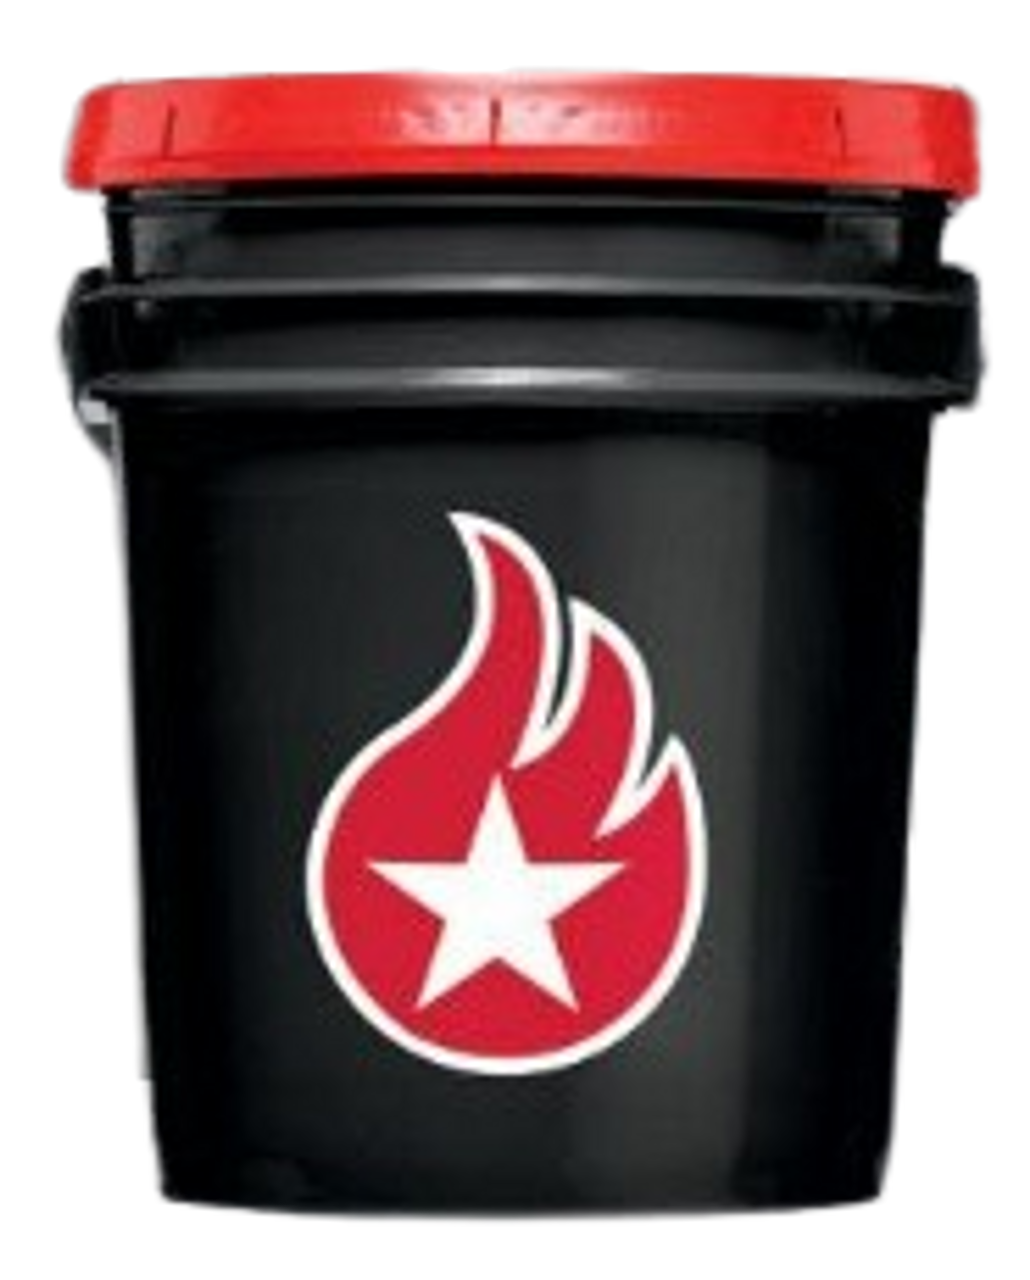 Starfire Full Synthetic ATF 668 - 5 Gallon Pail